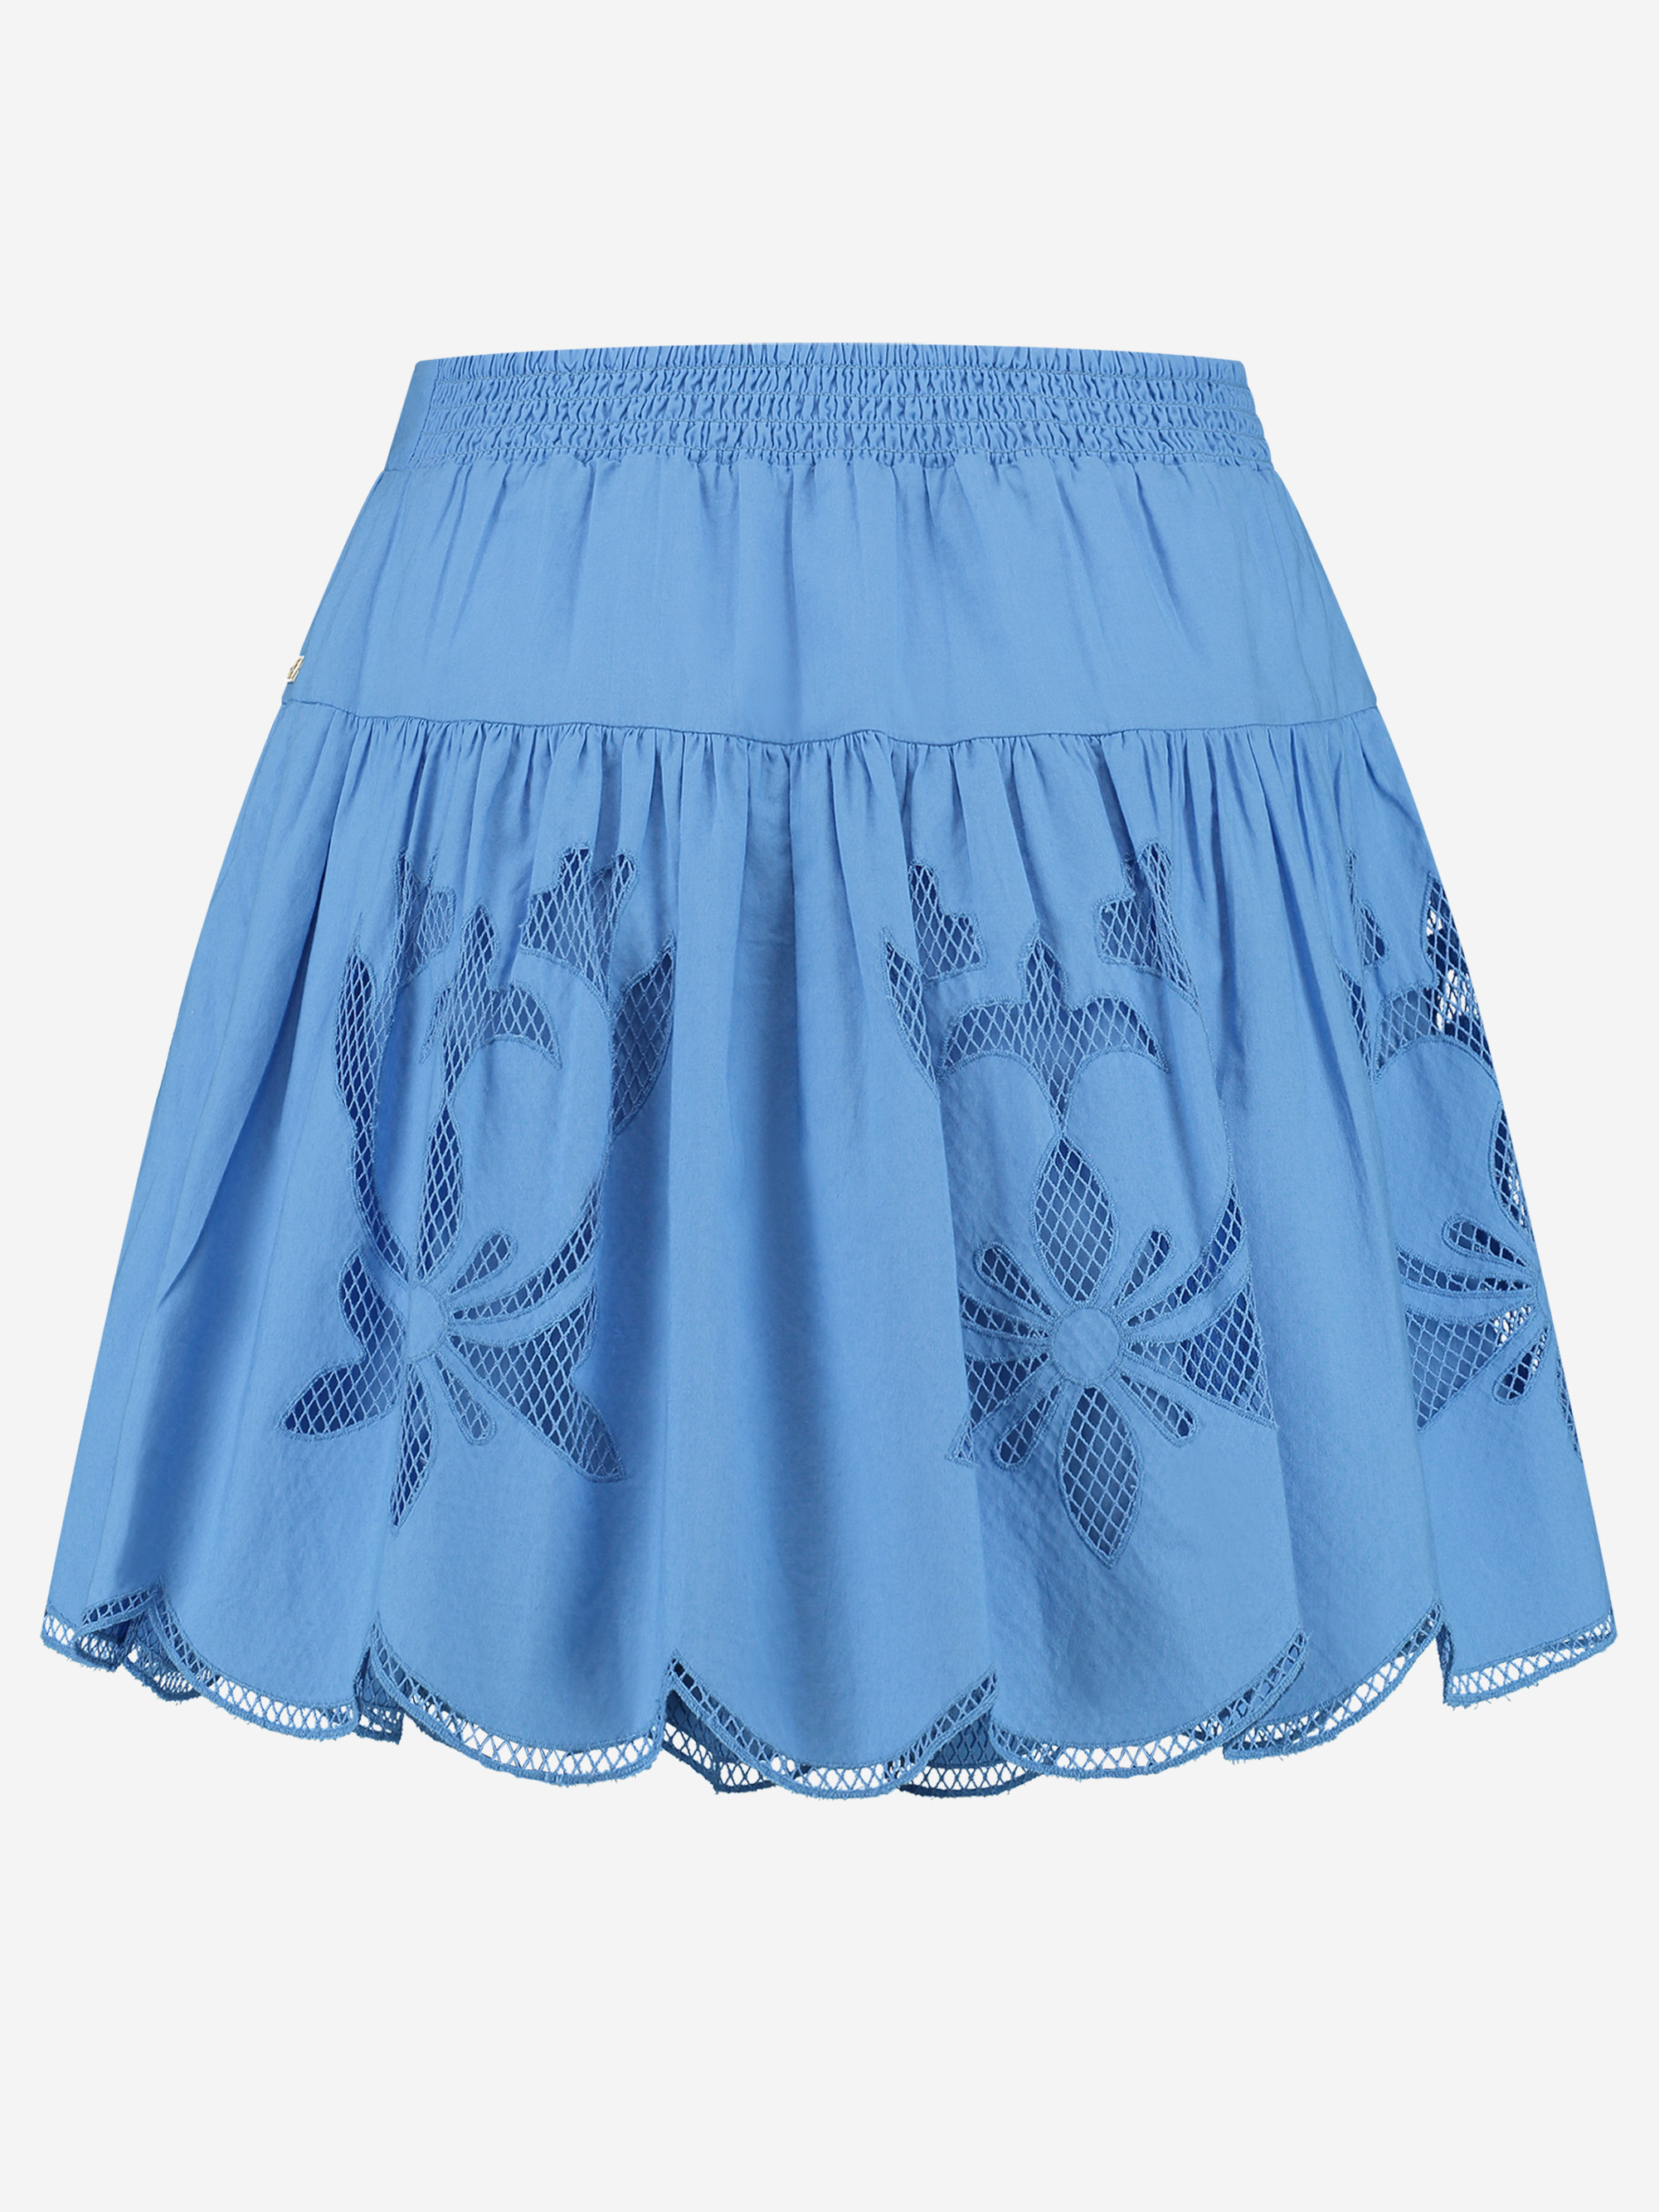 Skirt with embroidery